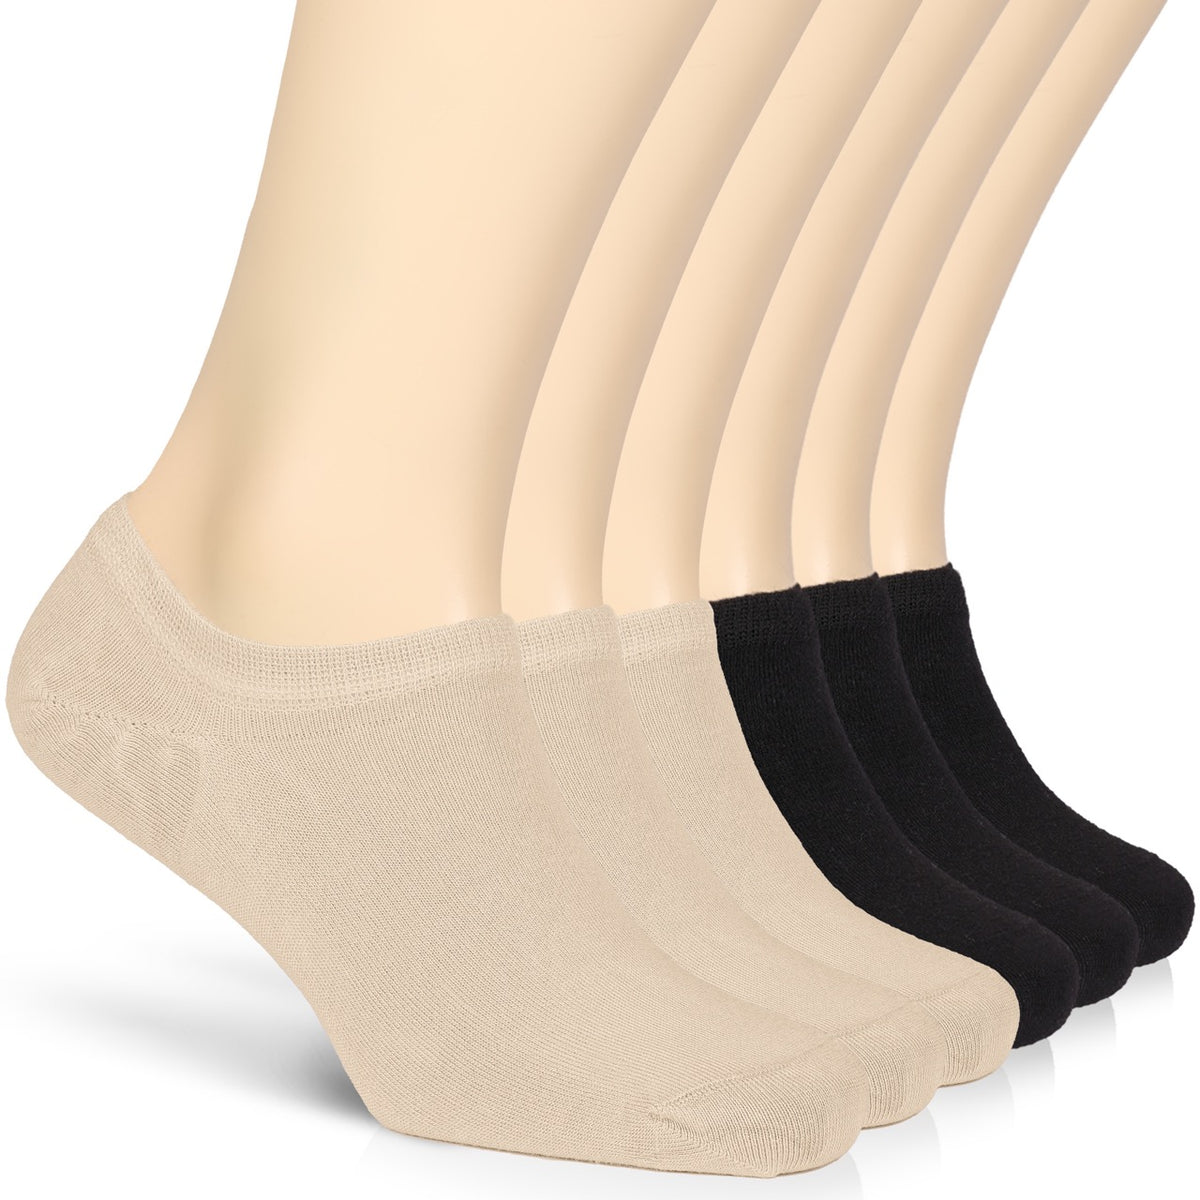 The picture showcases a collection of three pairs of no-show socks made of bamboo for women, available in black, beige shades.